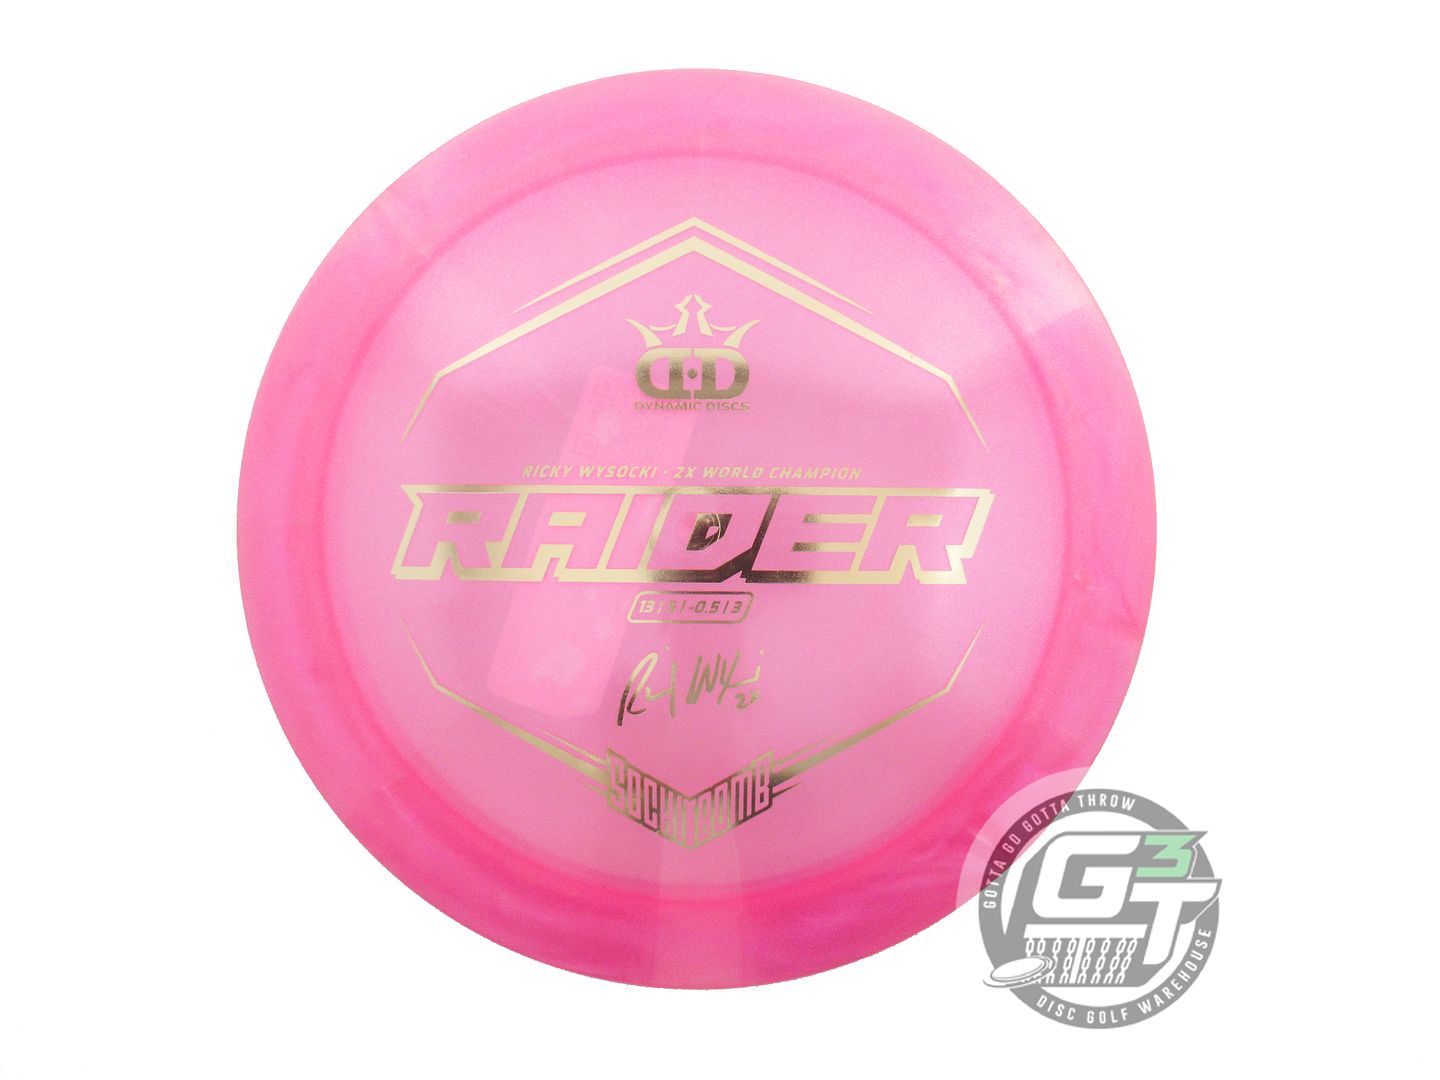 Dynamic Discs Limited Edition Ricky Wysocki Sockibomb Glimmer Lucid Ice Raider Distance Driver Golf Disc (Individually Listed)